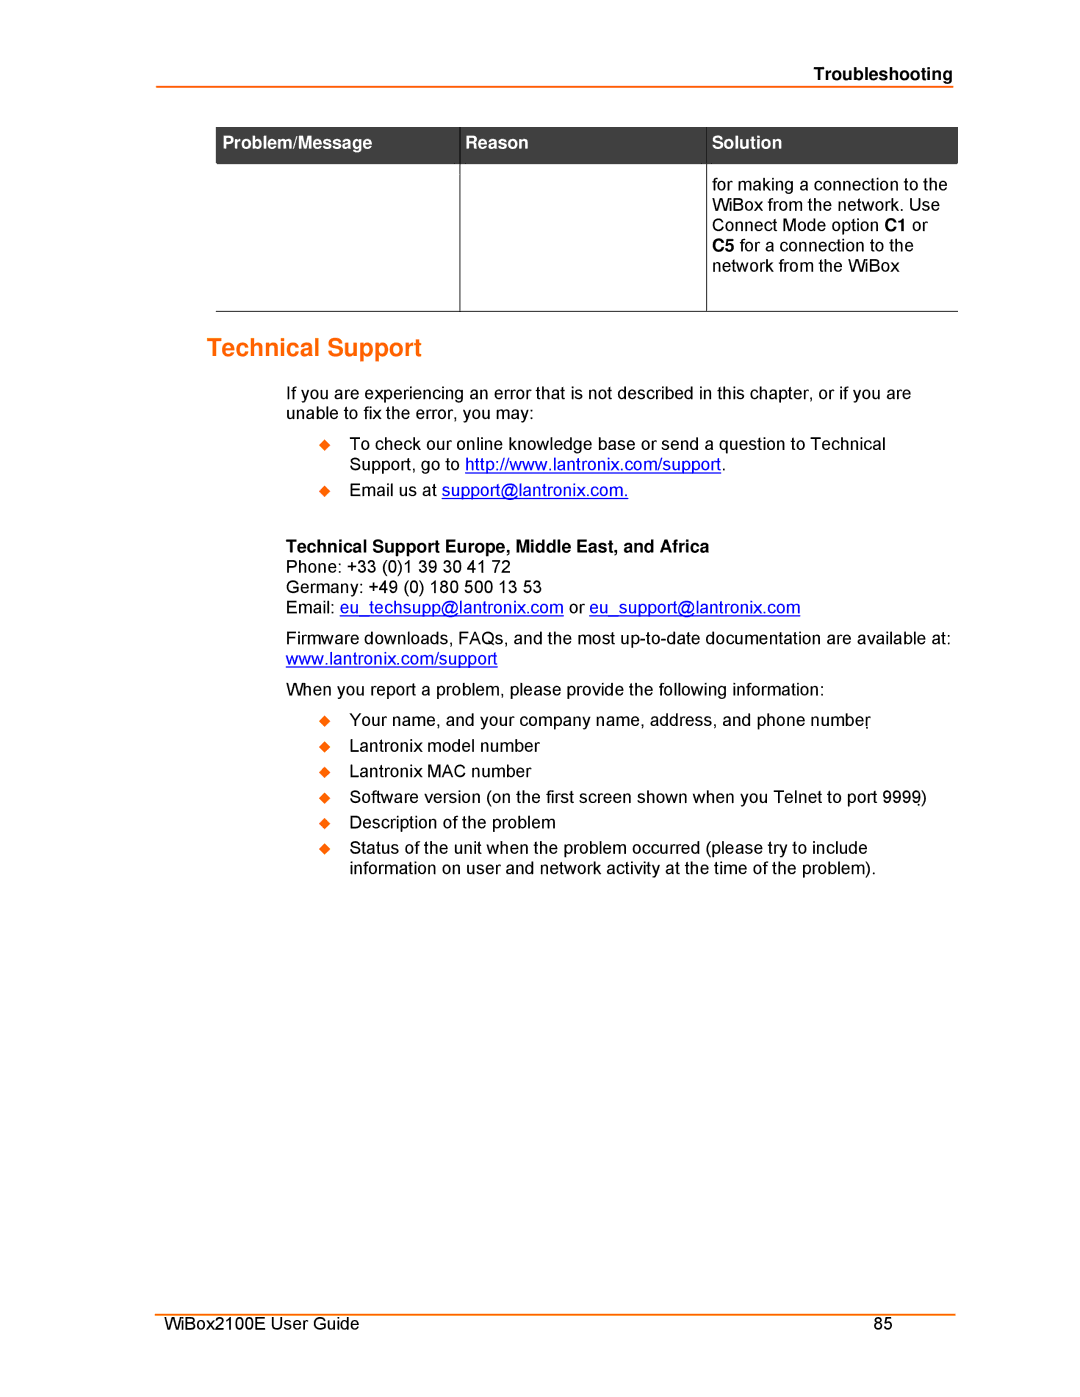 Lantronix Ethernet manual Technical Support Europe, Middle East, and Africa 